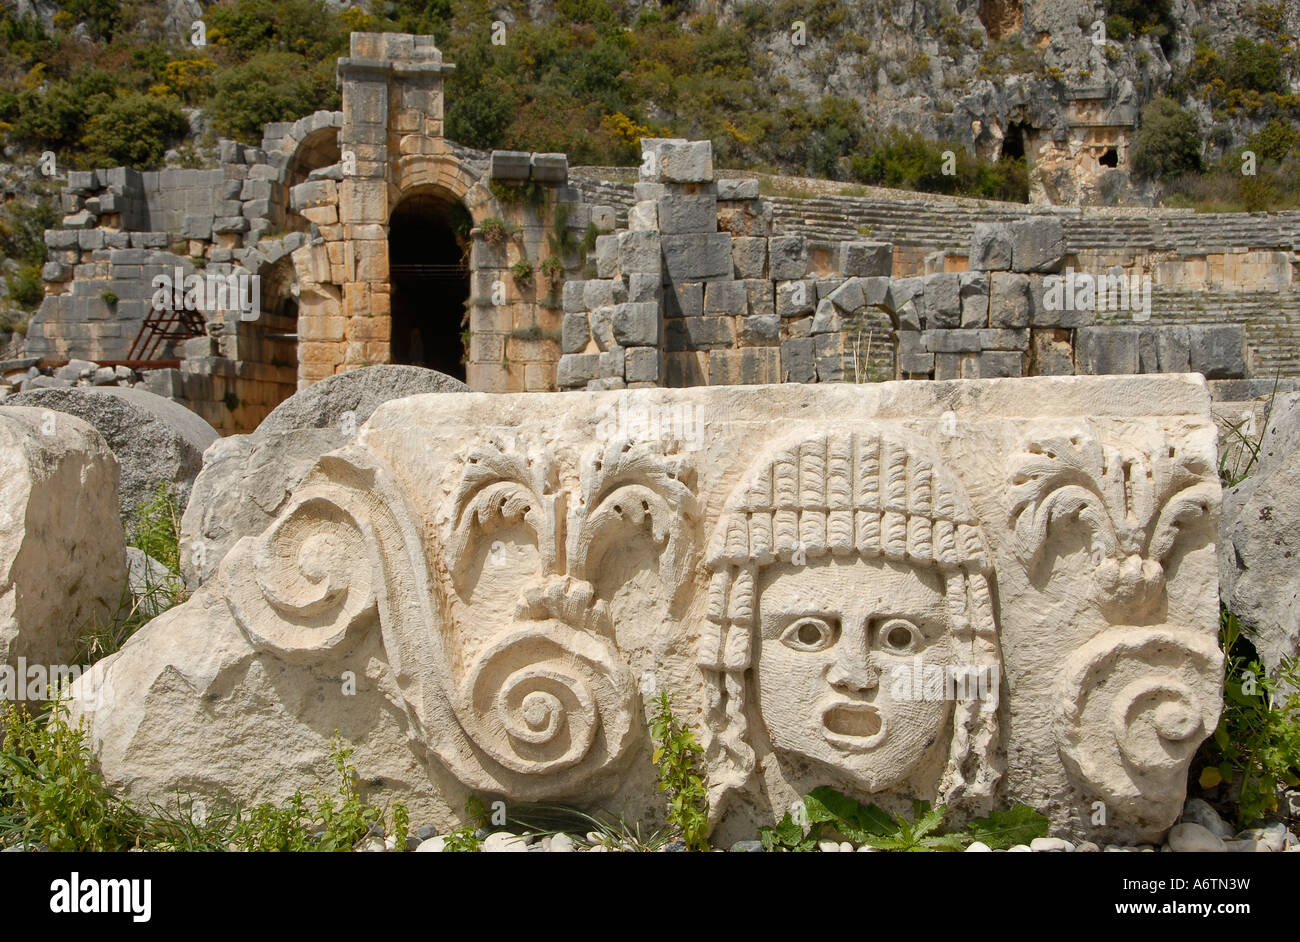 Carved relief at the ruins of Myra an ancient Greek town in Lycia where the town of Kale or Demre is today, located in Antalya Province of Turkey Stock Photo